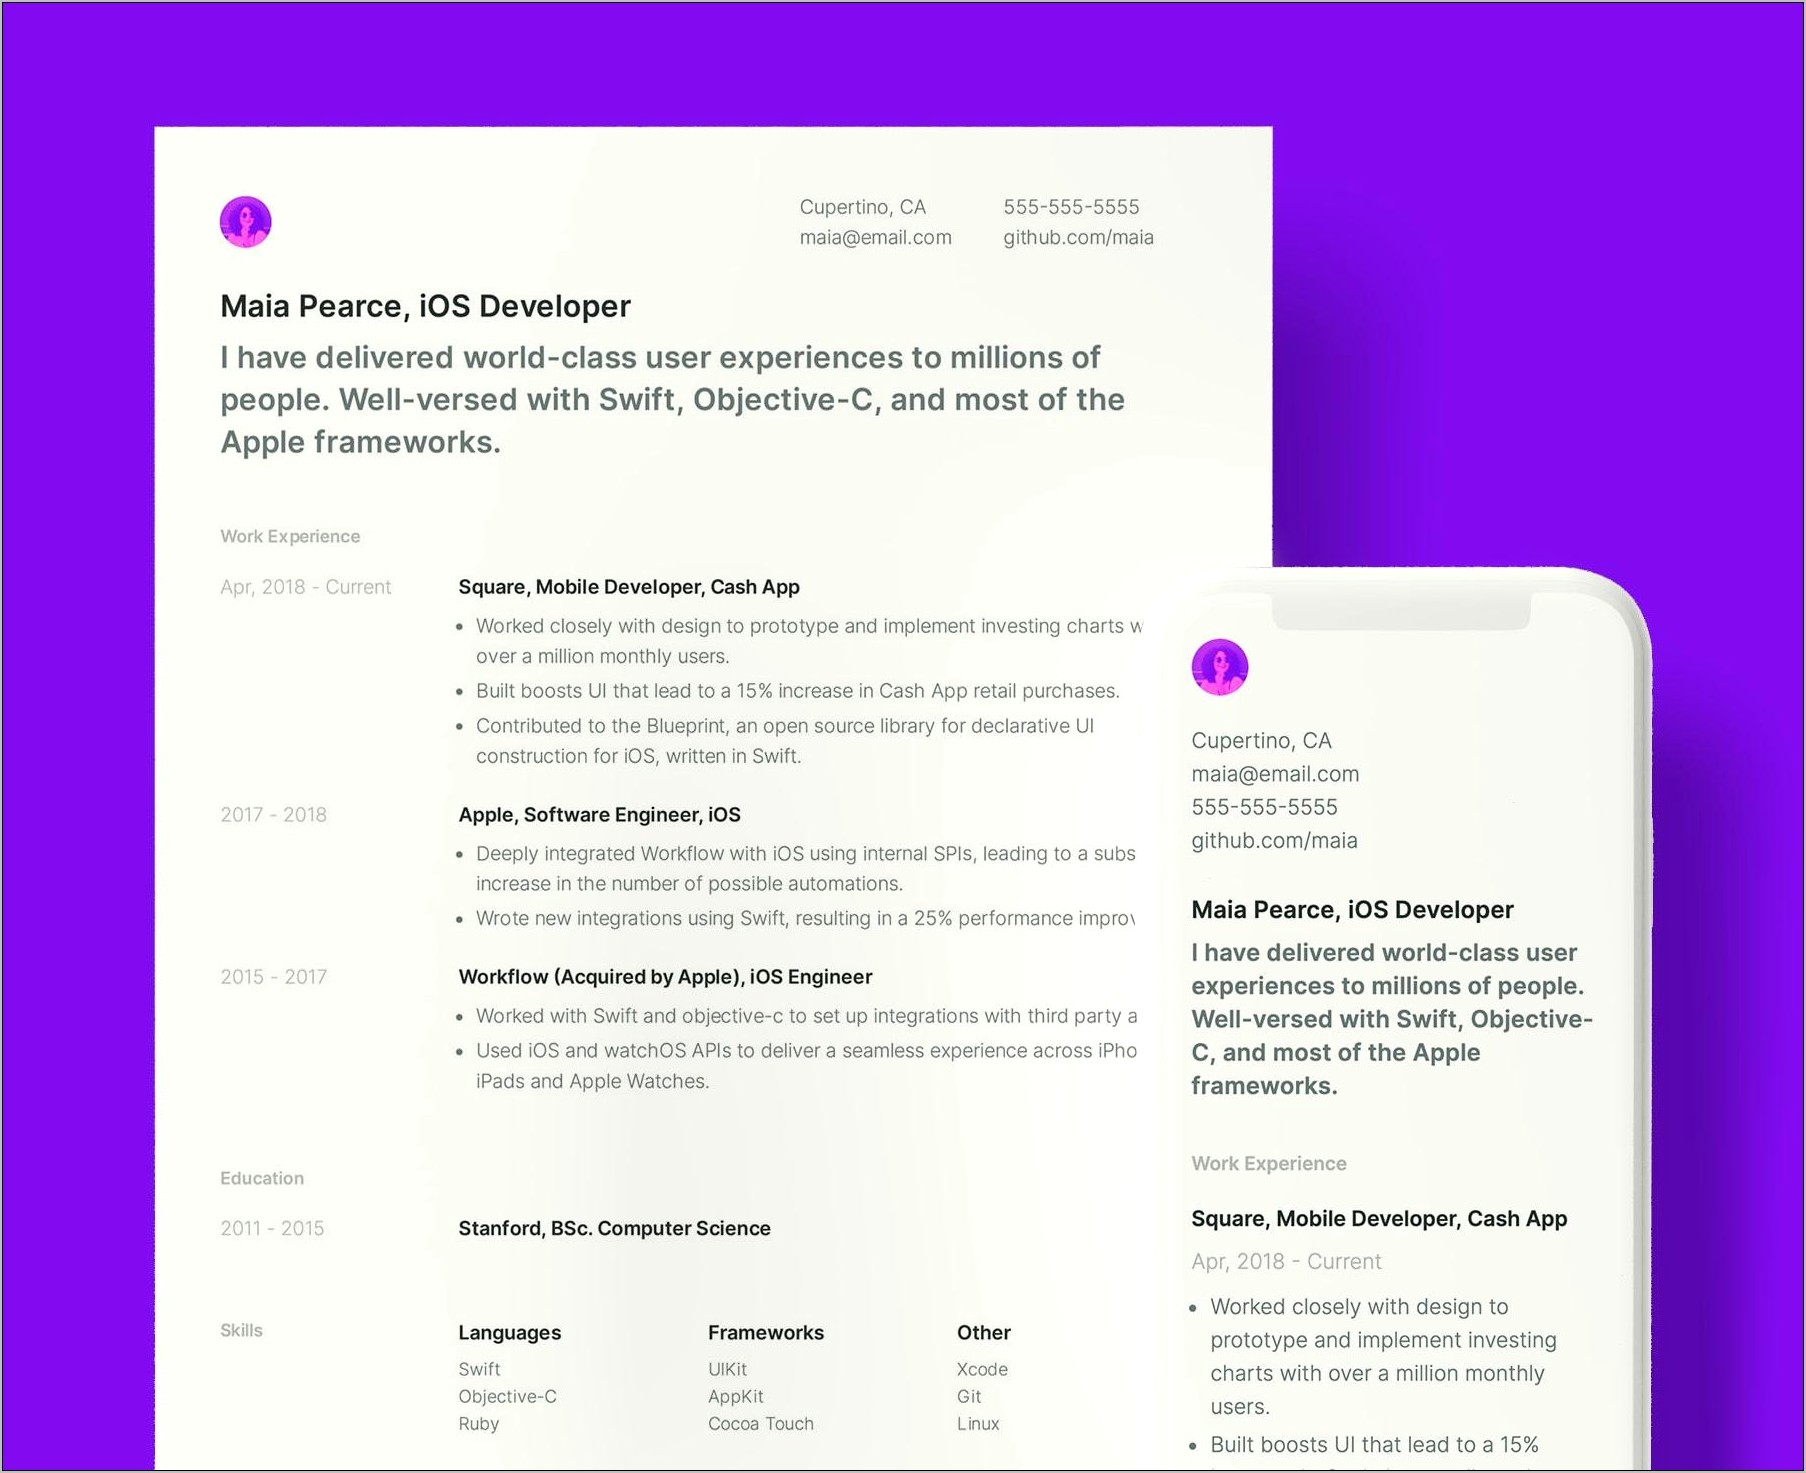 Examples Of Engineering Manager Resumes